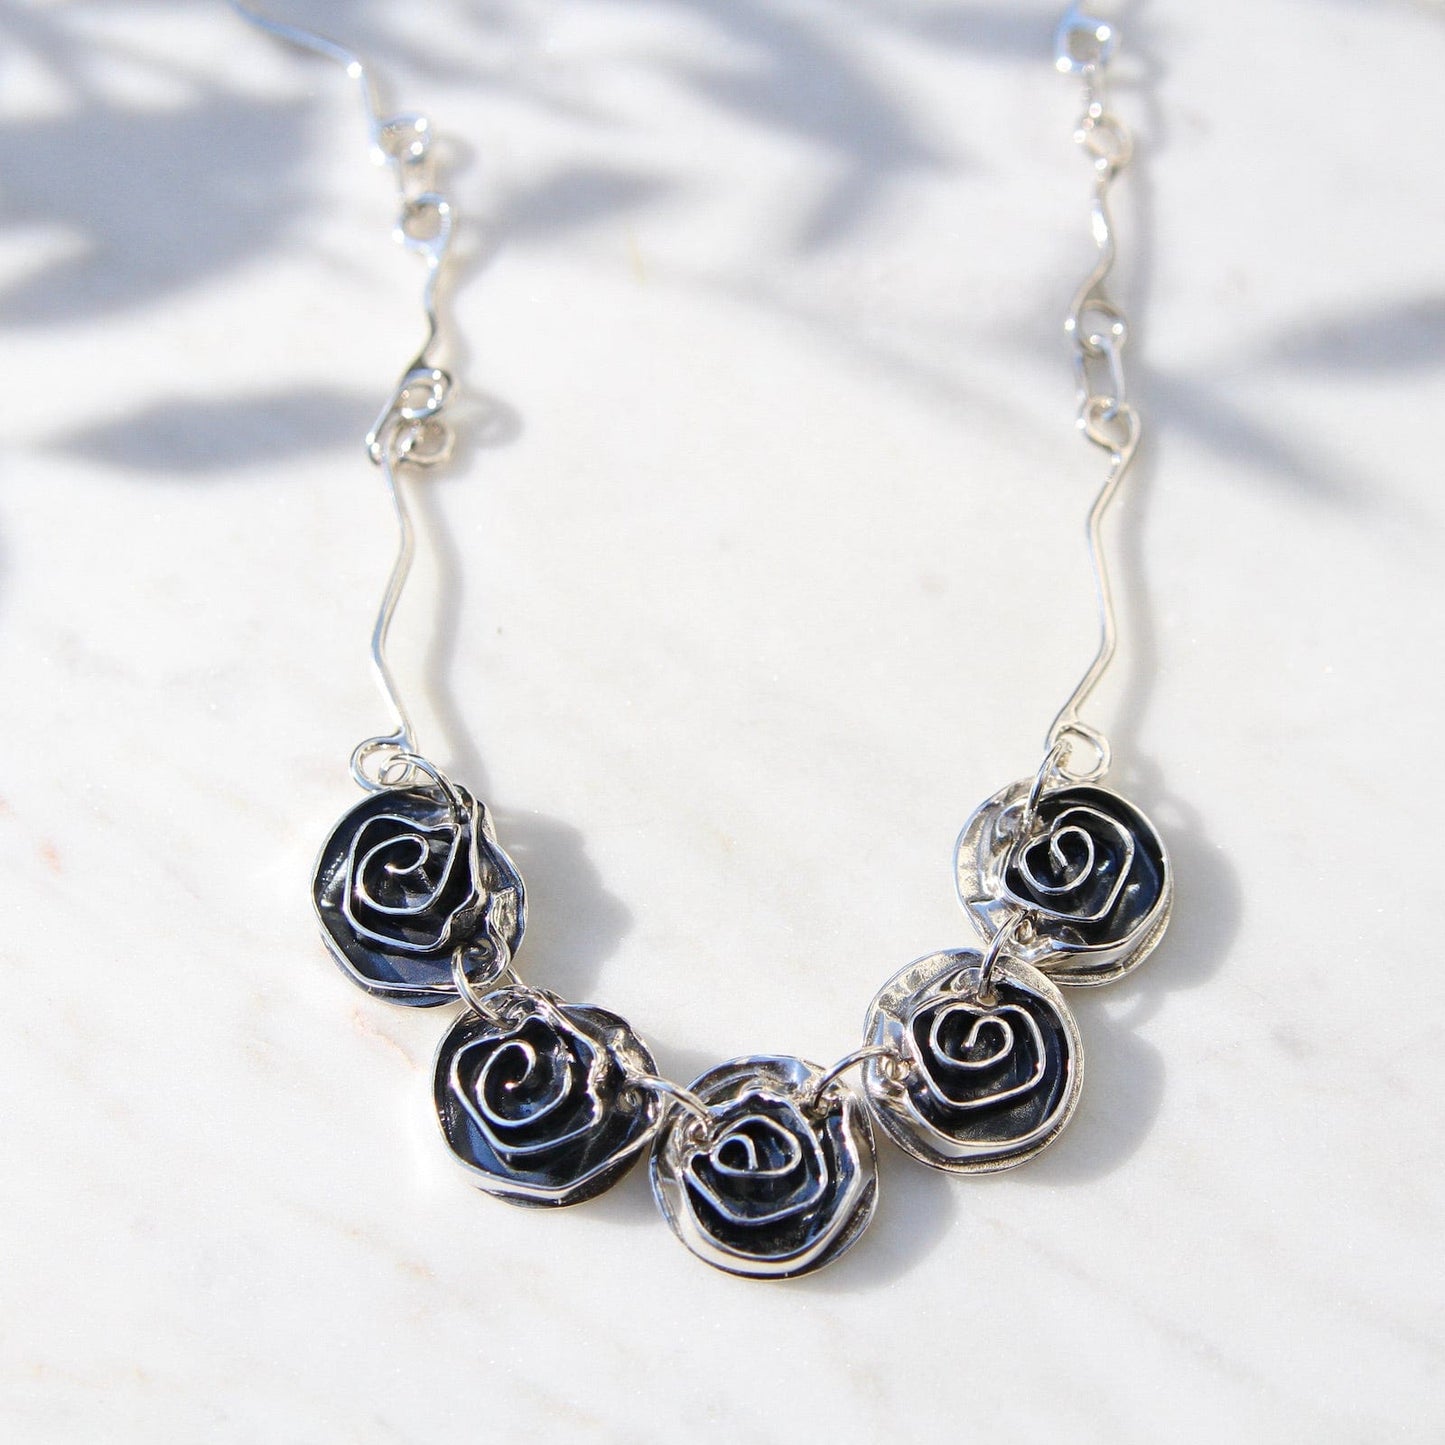 NKL 5 Roses on Signature Chain Necklace